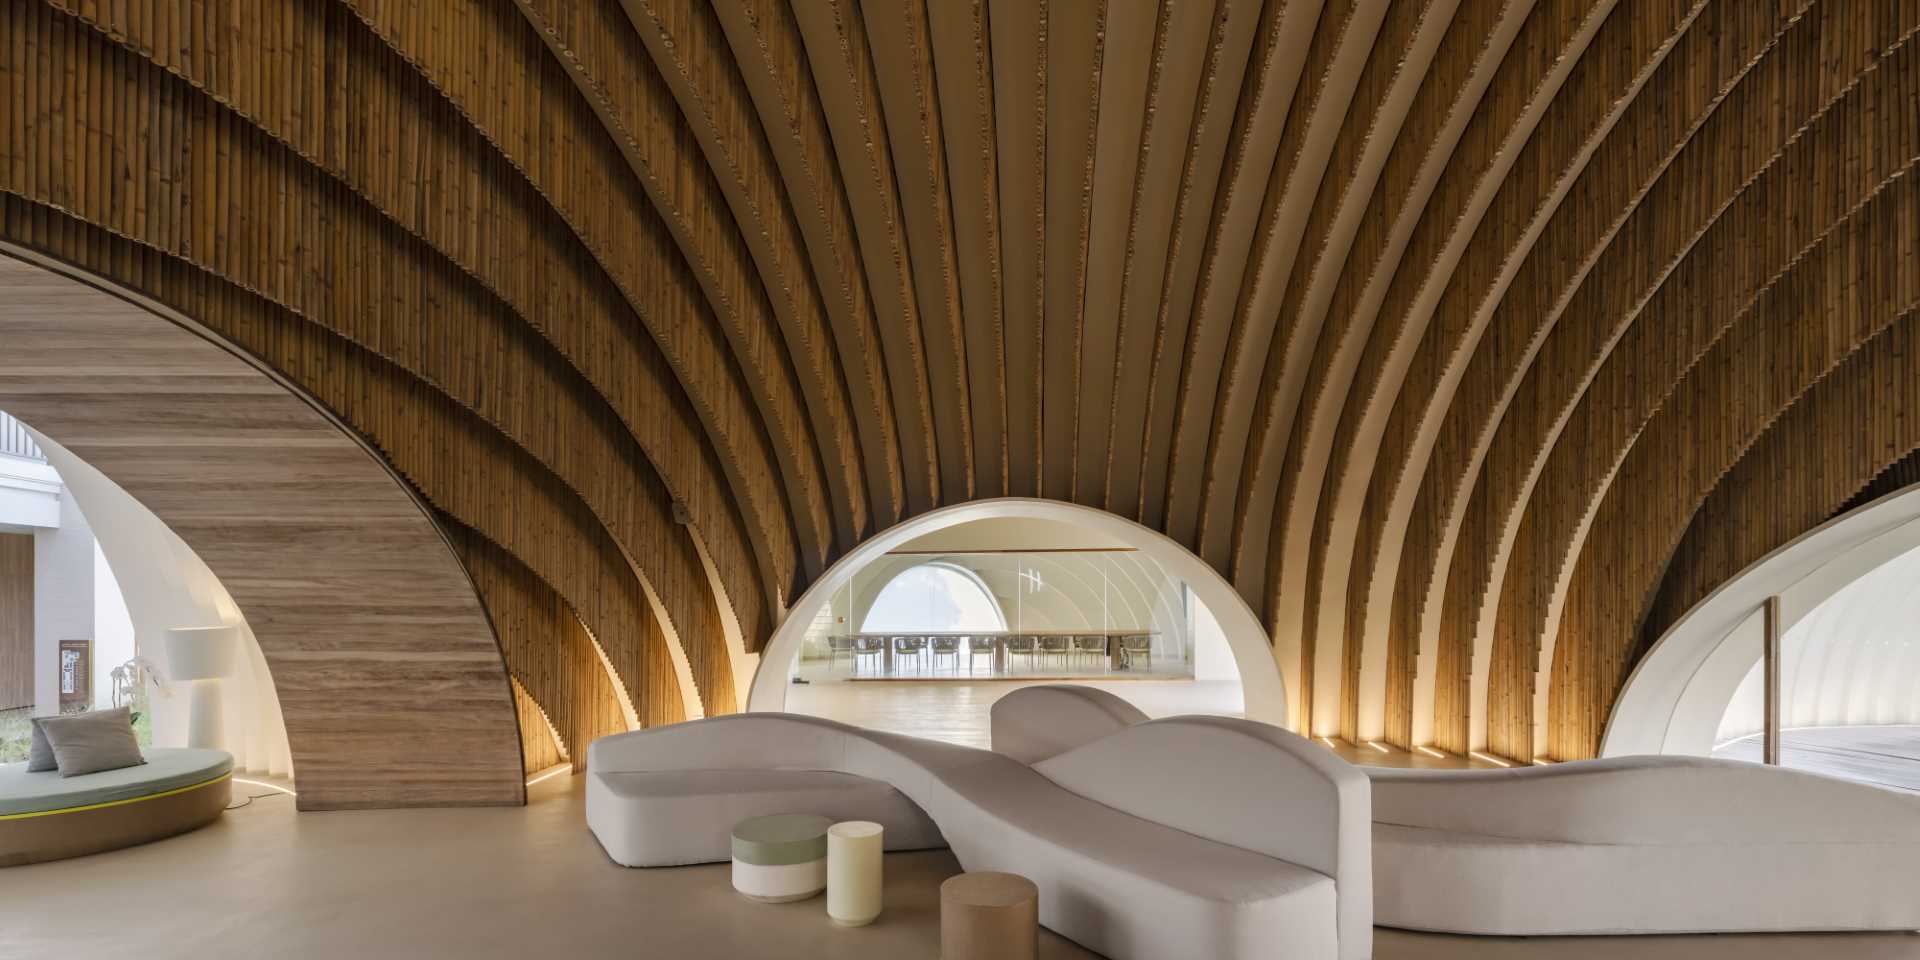 A modern hotel lobby that includes curved walls, hanging planes of bamboo, and hidden lighting that highlights the design.